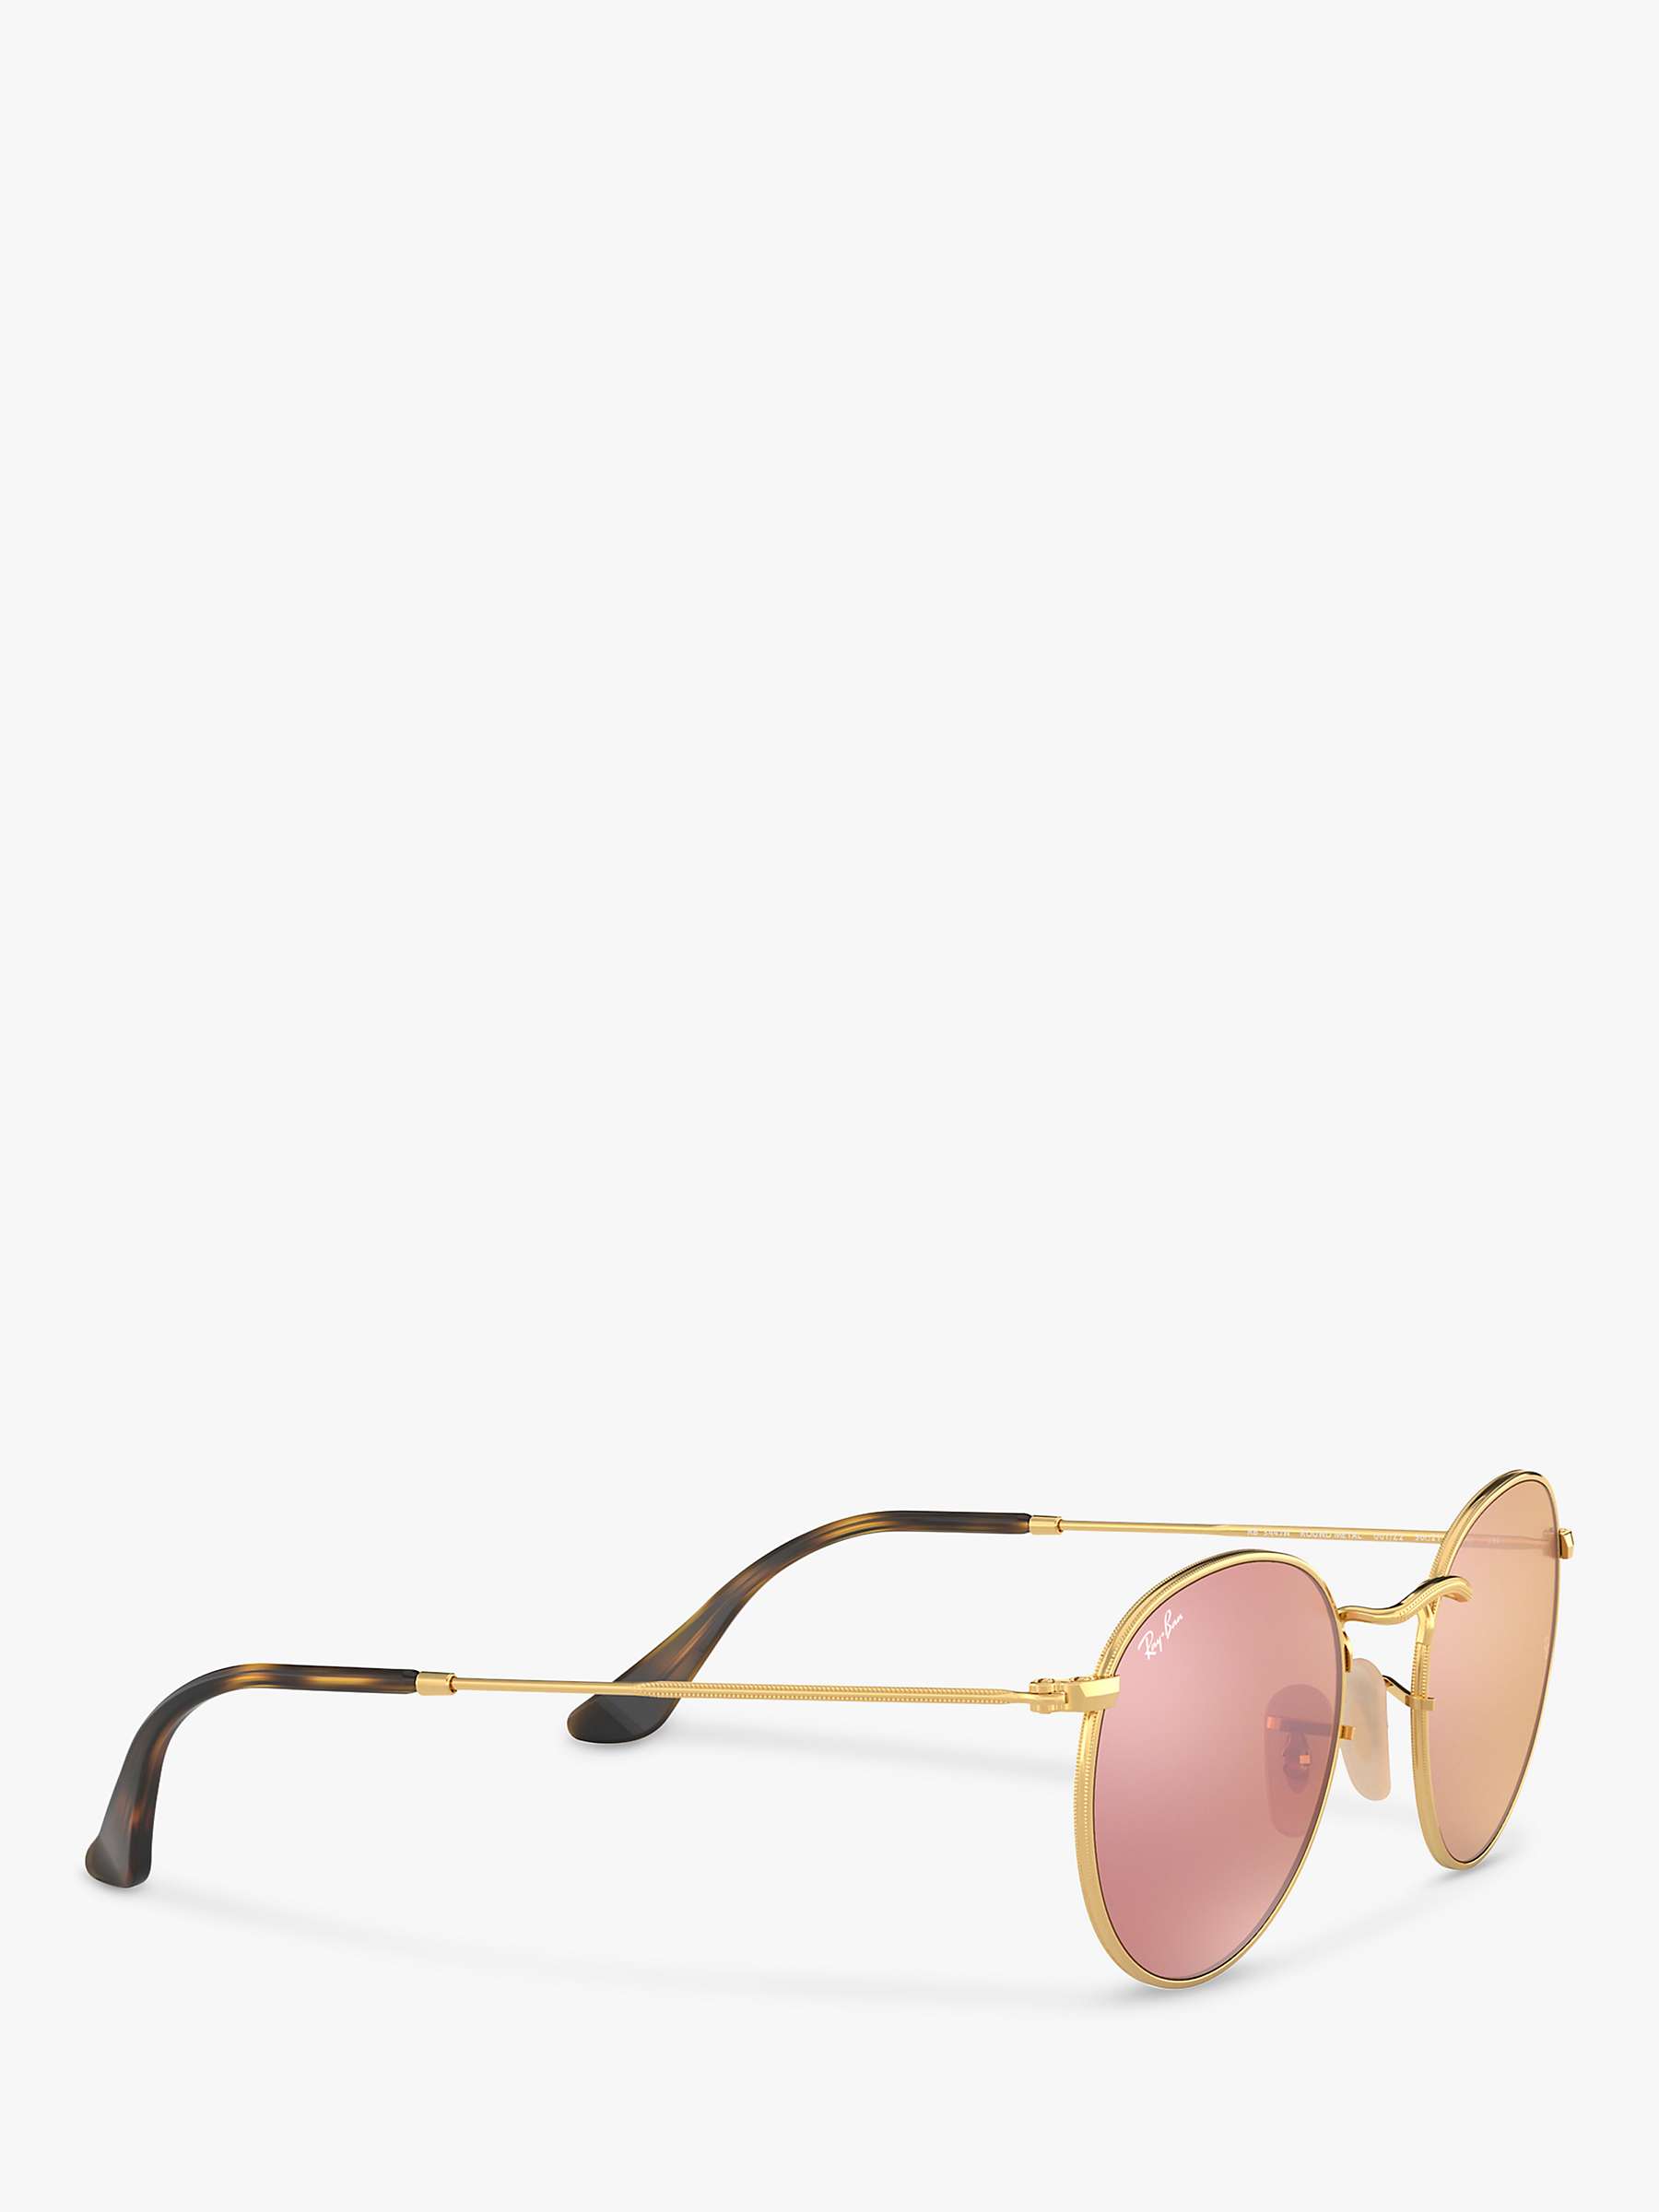 Buy Ray-Ban RB3447N Men's Round Flash Sunglasses, Shiny Gold/Mirror Pink Online at johnlewis.com